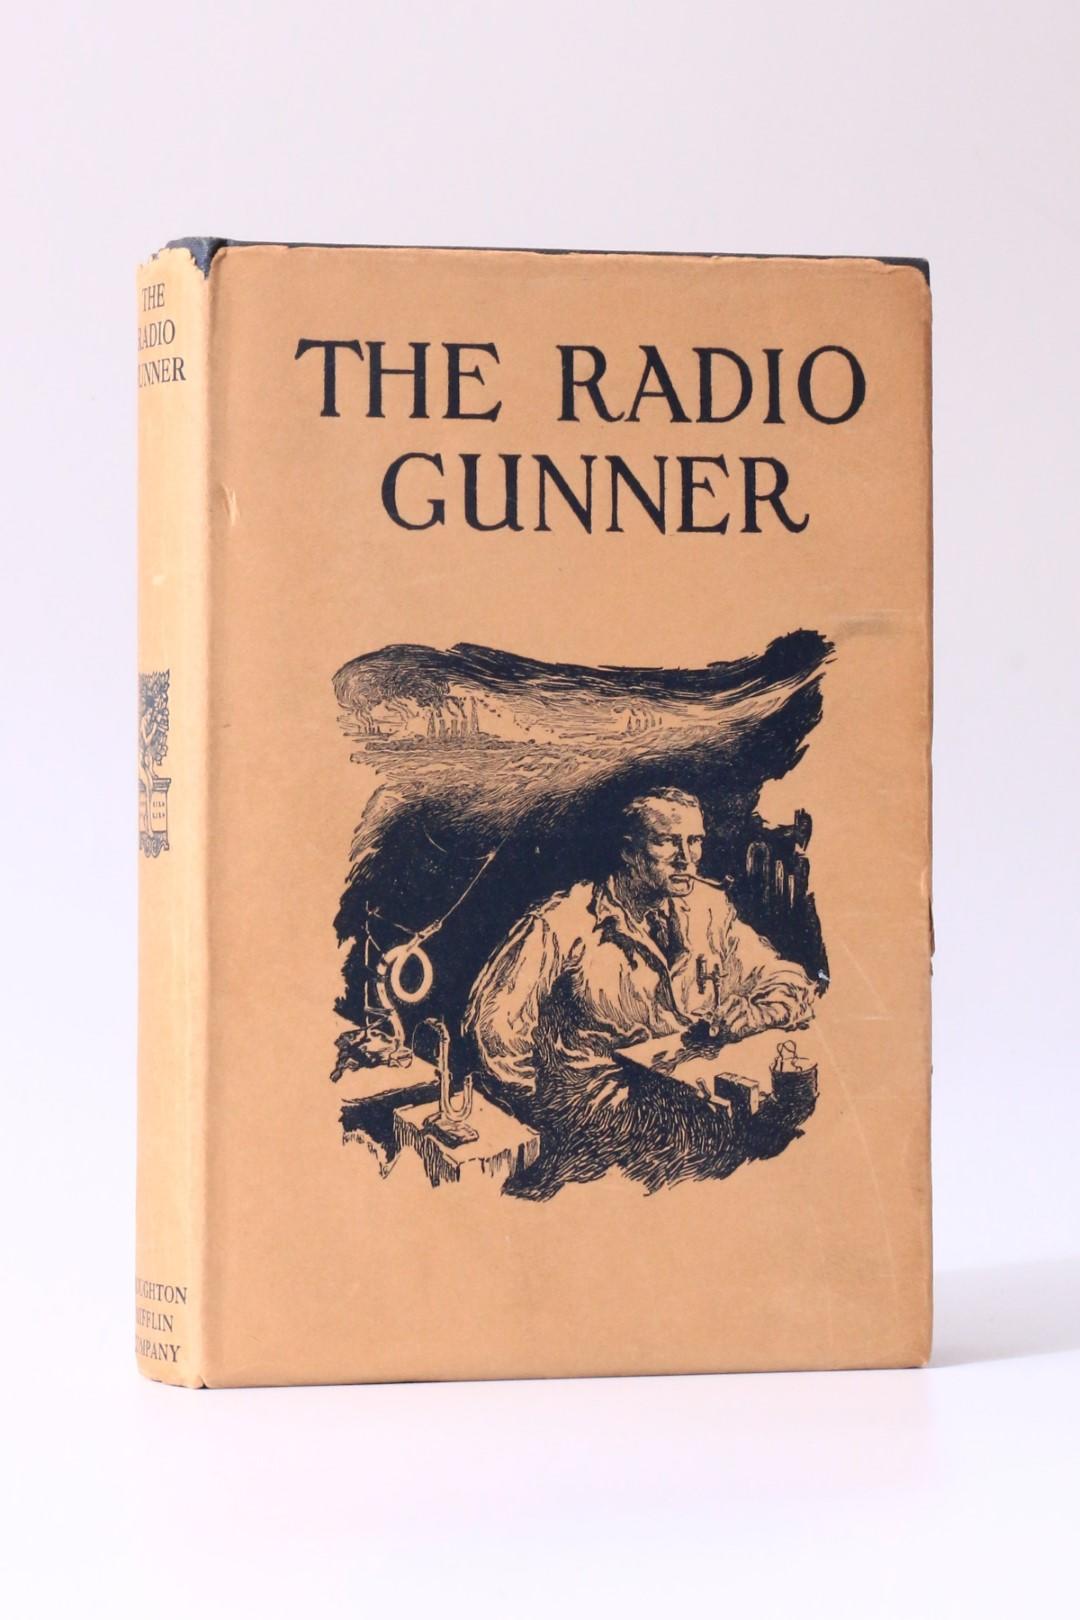 Alexander Forbes - The Radio Gunner - Houghton Mifflin and Co., 1924, First Edition.